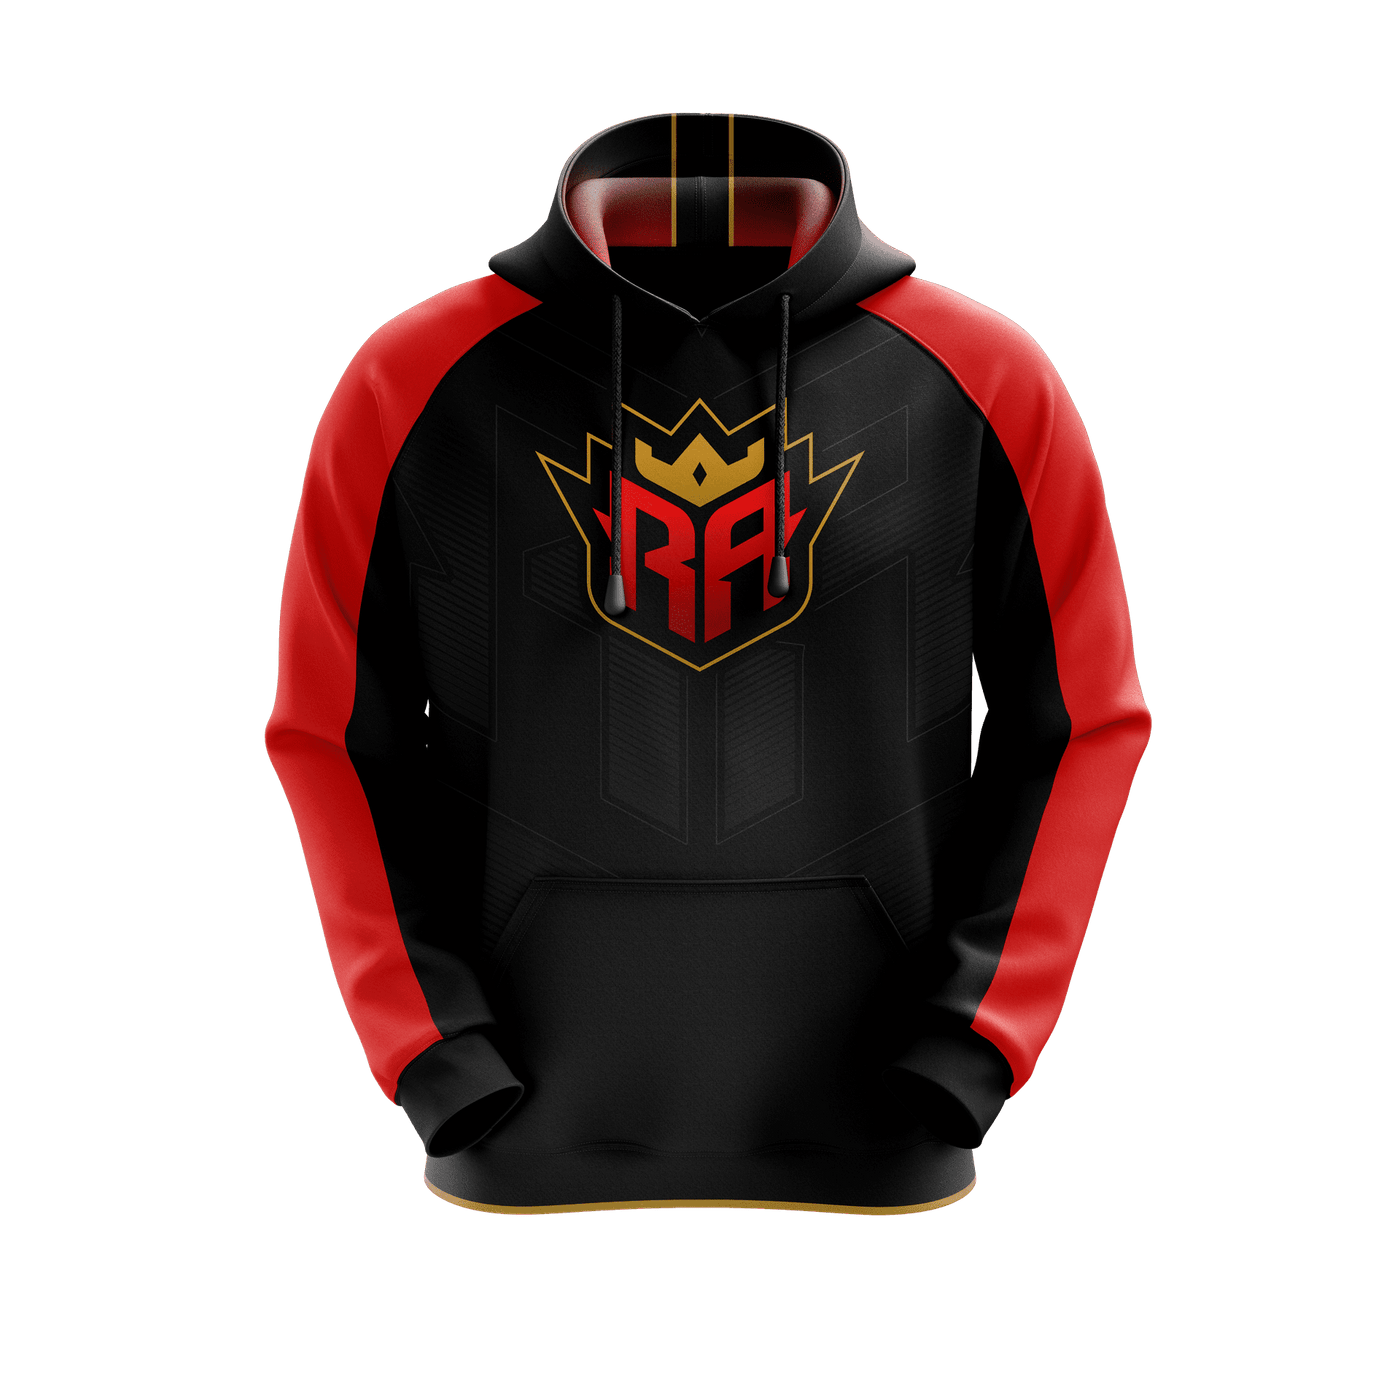 Reign Above Pro Hoodie Red-Black